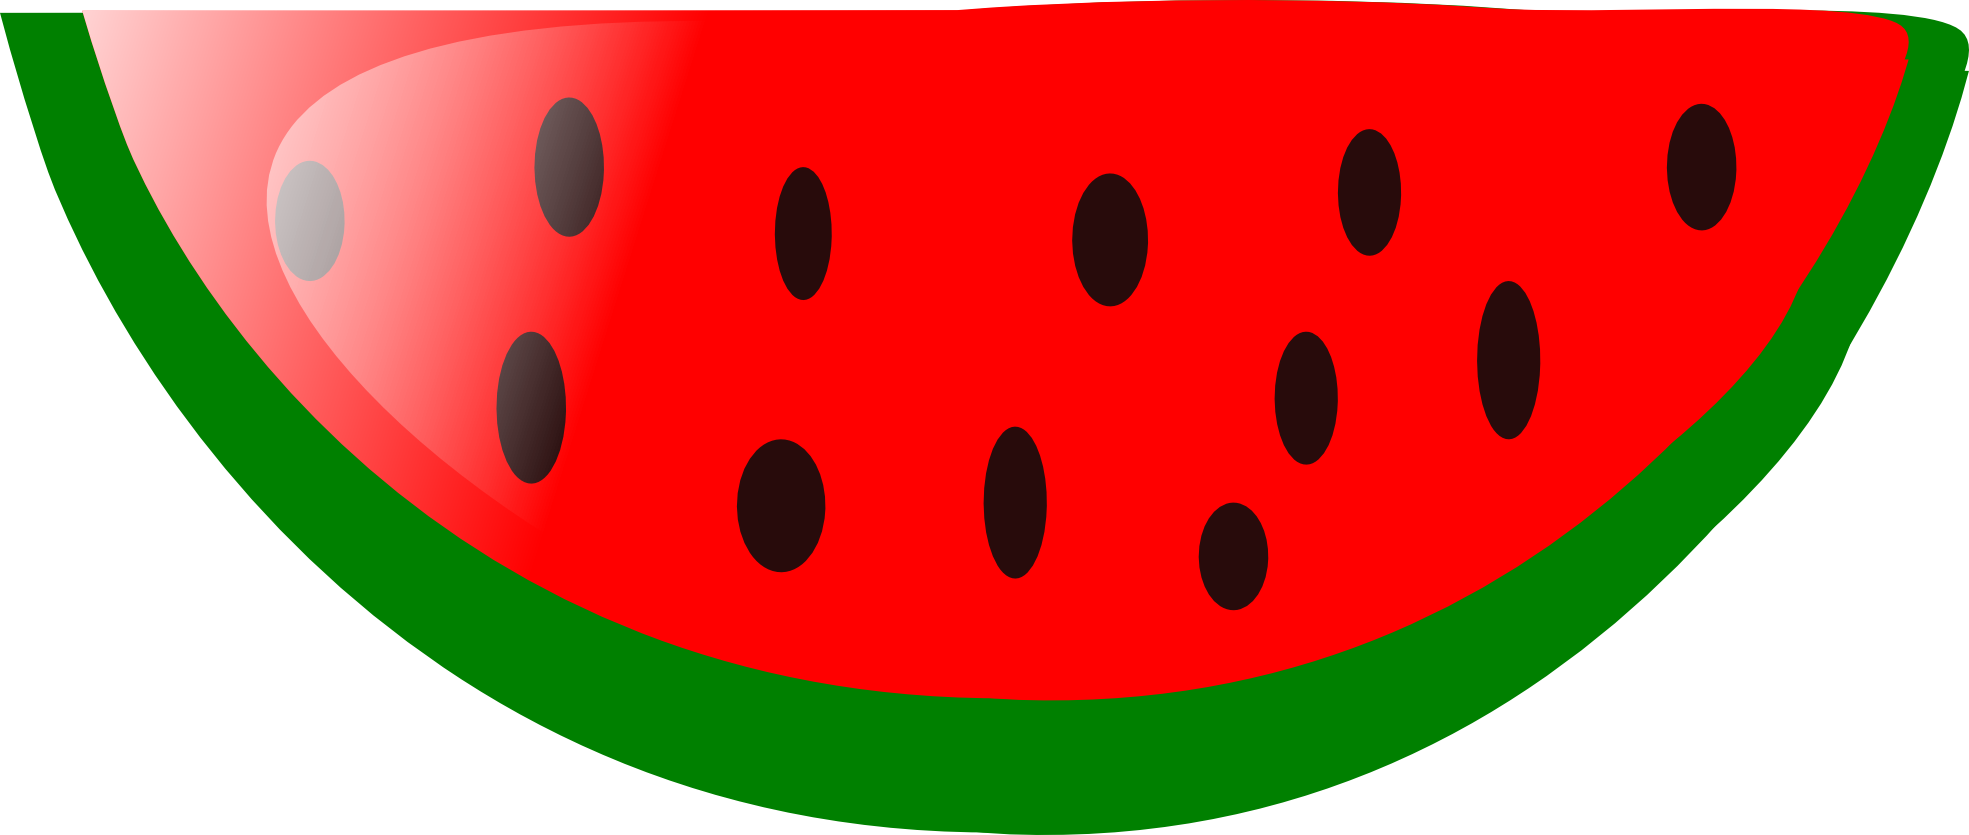 Free Watermelon Clipart simple, Download Free Clip Art on